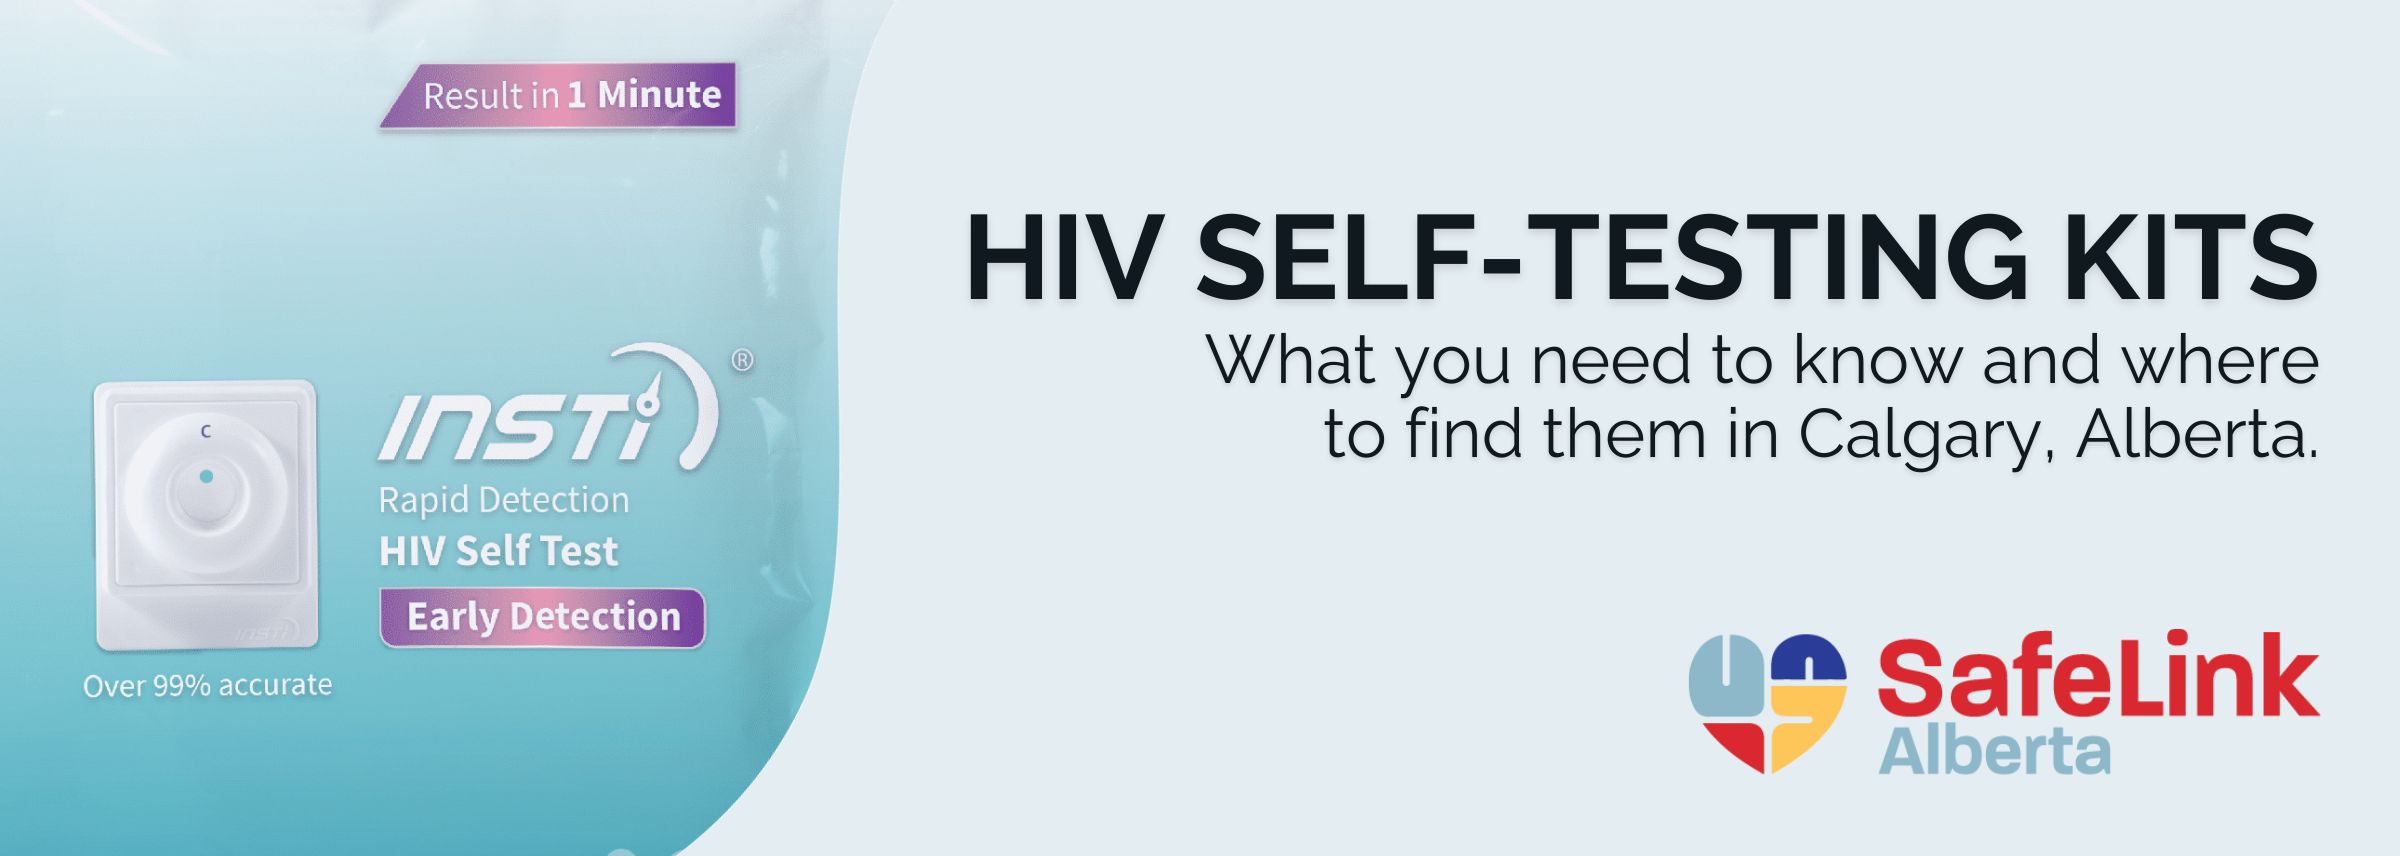 Photo of INSTI HIV Self-Test. Text reads"HIV SELF-TESTING KITS. What you need to know and where to find them in Calgary, Alberta.